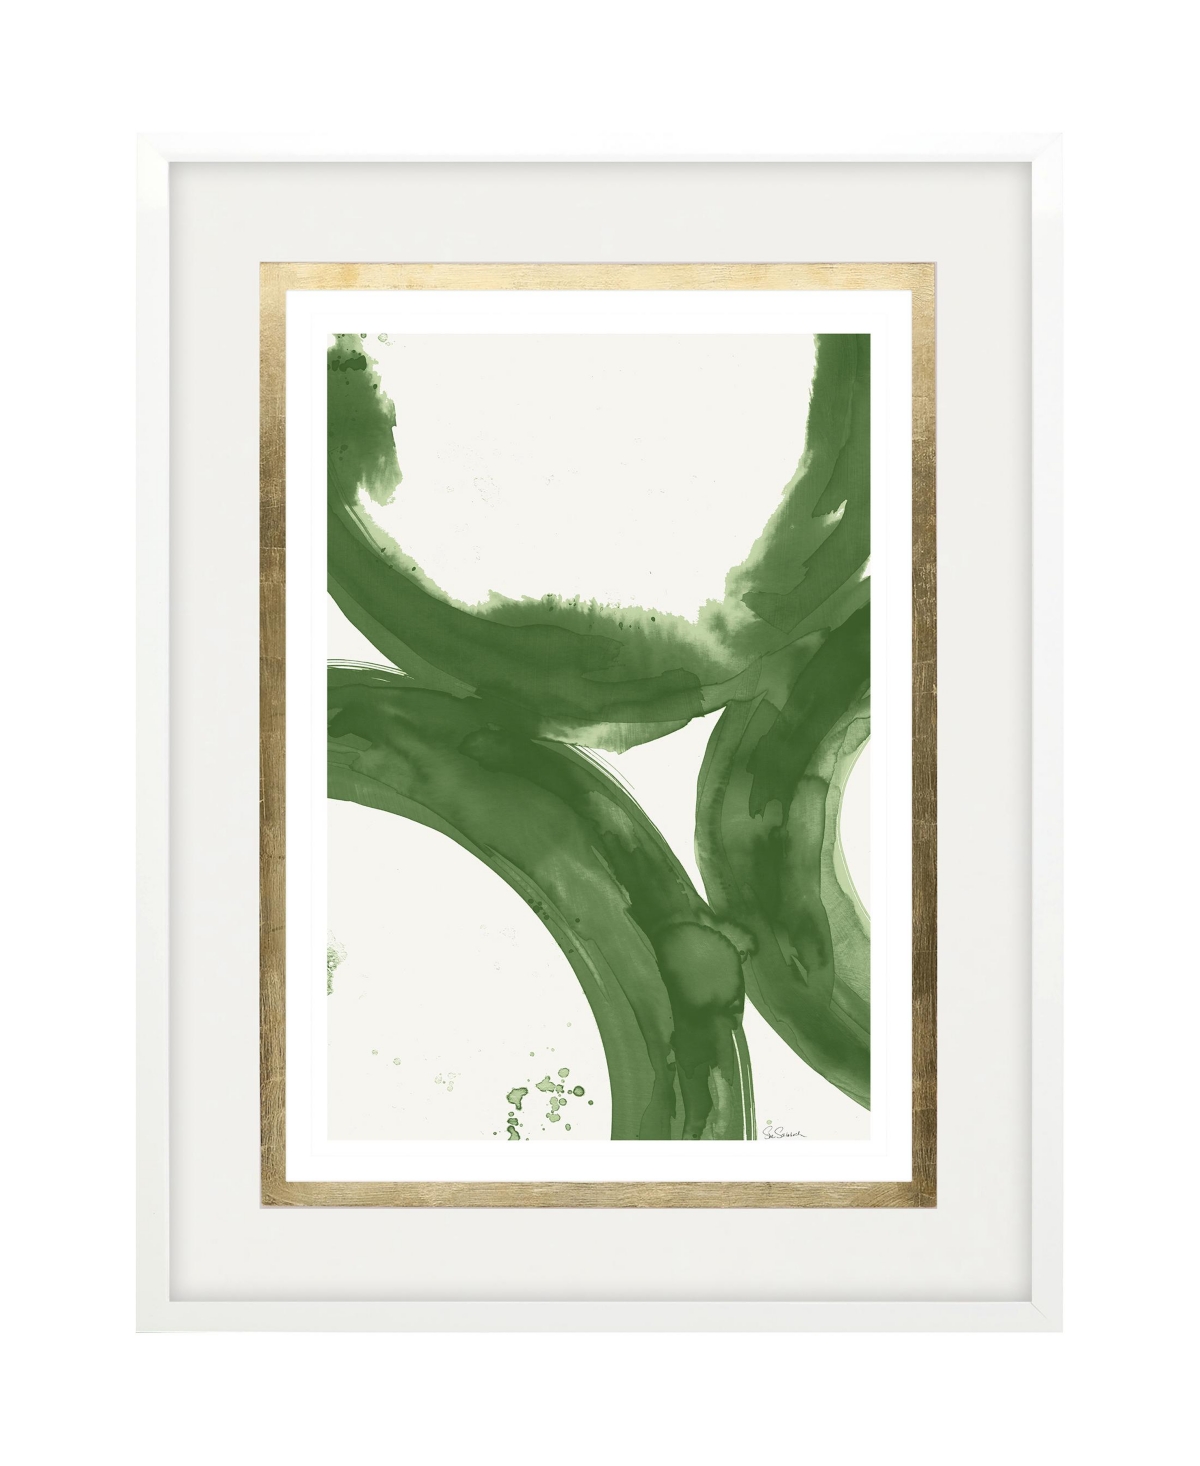 Paragon Picture Gallery Rings Of Water Ii Framed Art In Green